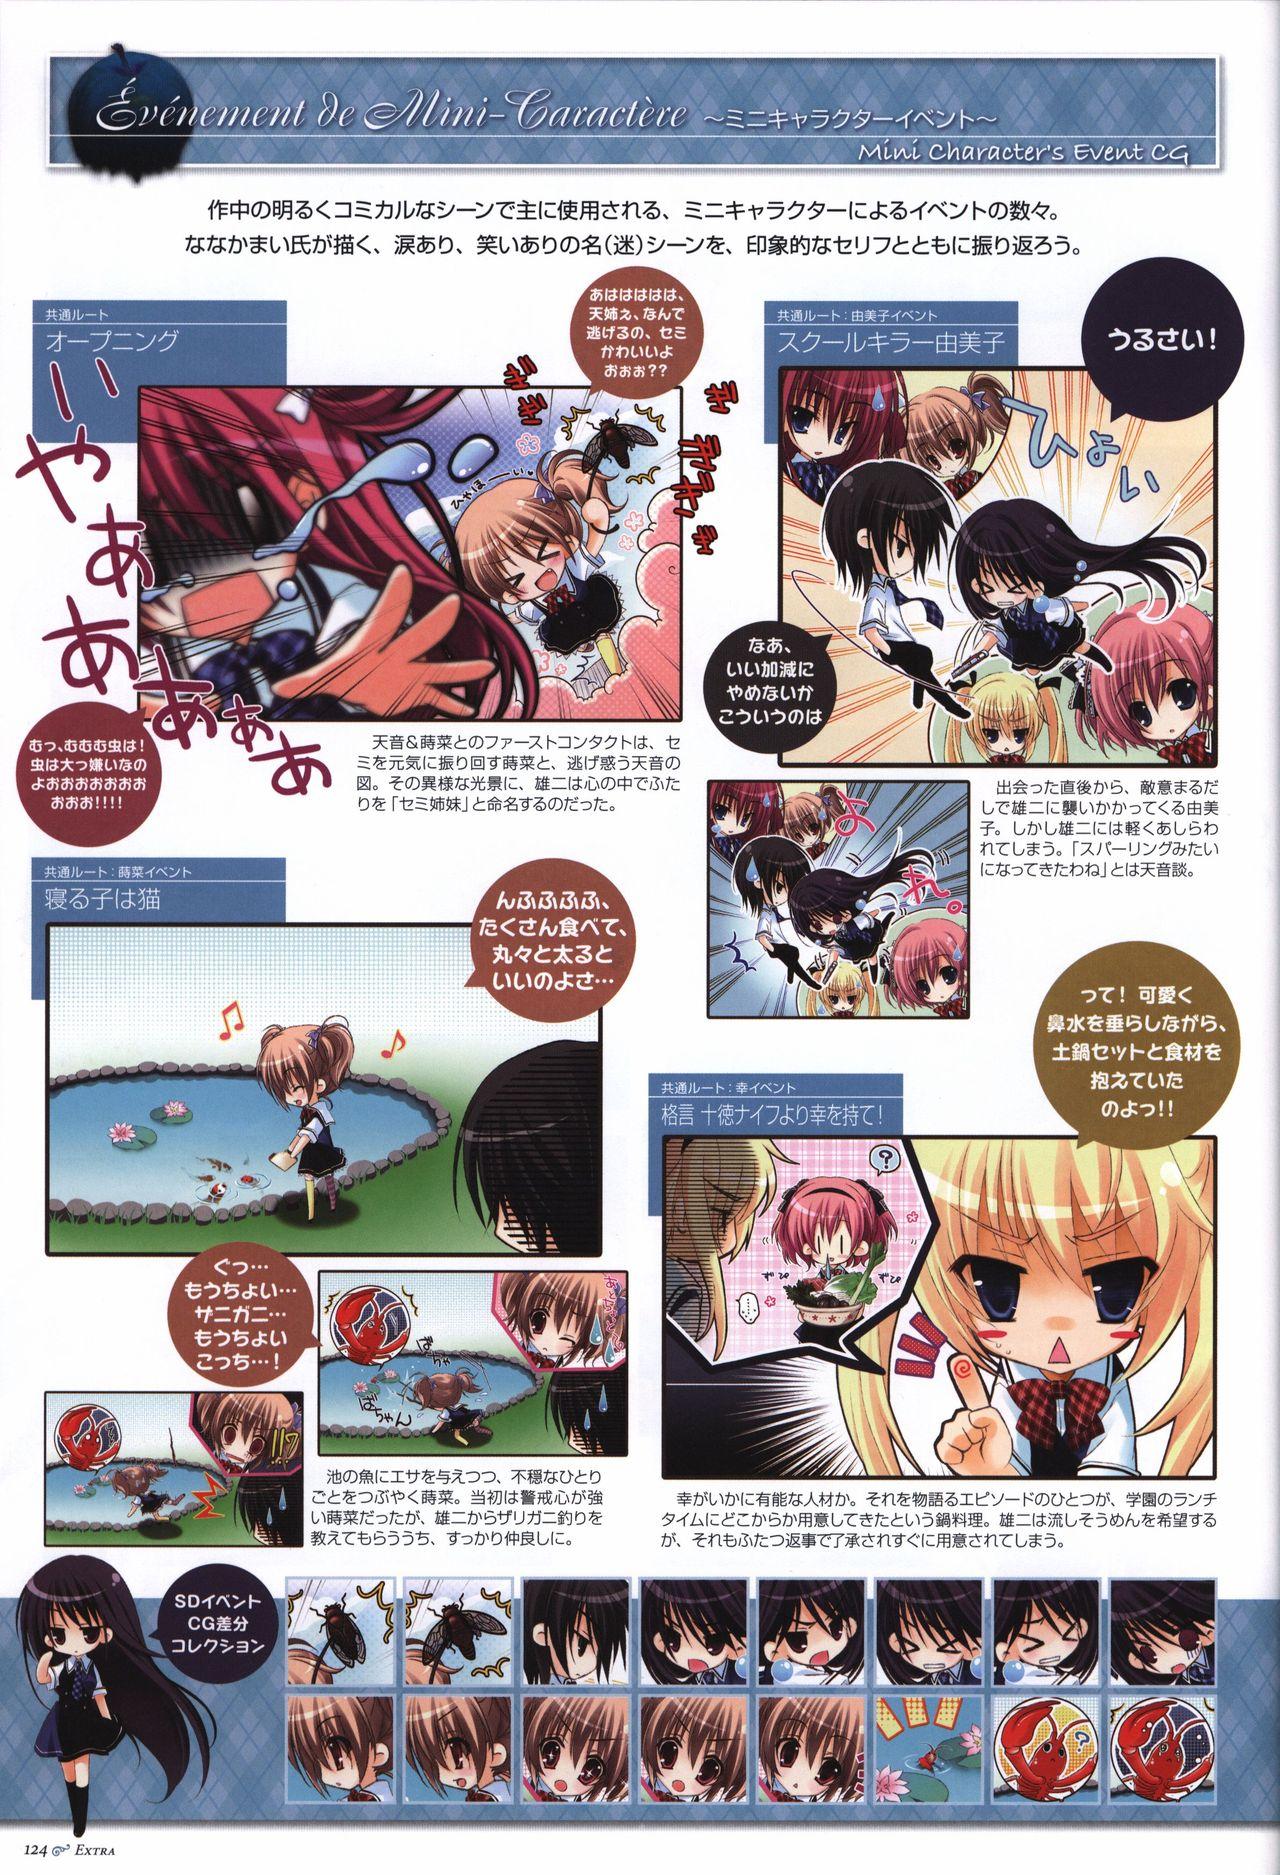 The Fruit of Grisaia Visual FanBook 124